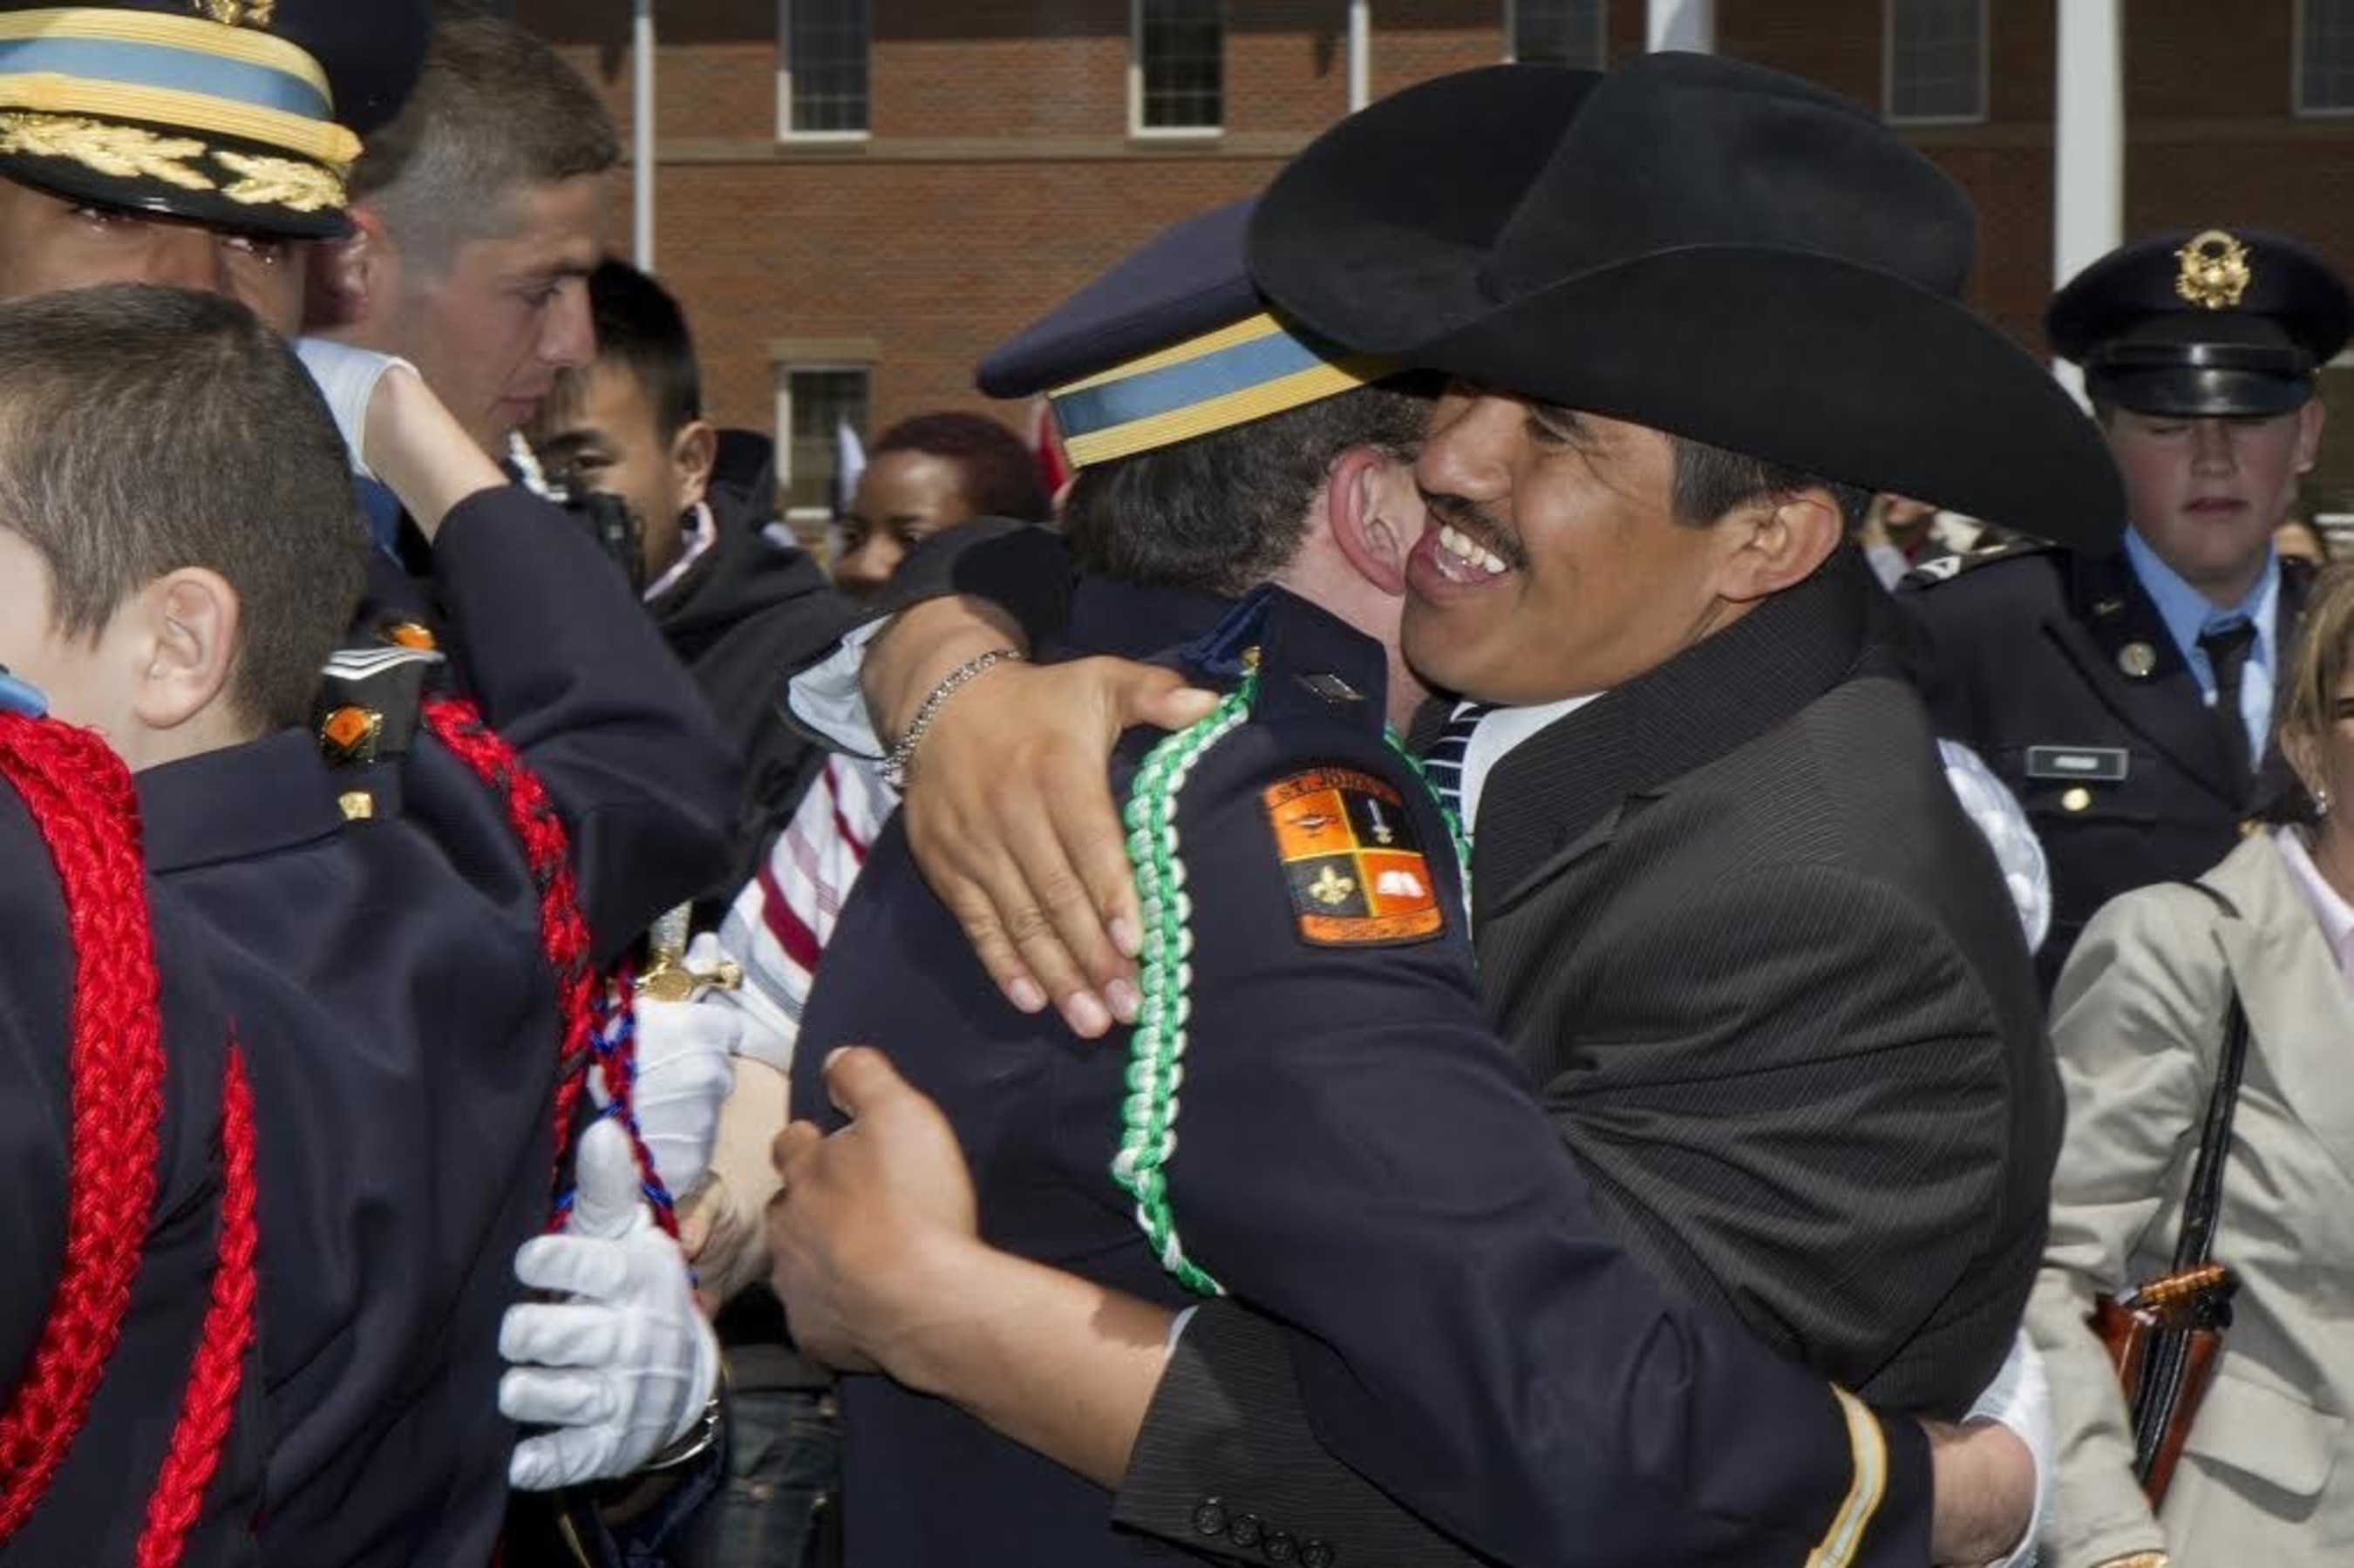 Leo Alvarado, Spanish teacher and soccer coach at St. John's Military School in Salina, Kansas, hugs a graduate and former student at Commencement. Teachers and staff at St. John's place a strong emphasis on building relationships with cadets and their families. St. John's was recently recognized for placing a strong emphasis on engaging families in their child's education and social development as well as the school's commitment to ensuring each cadet is supported by at least one adult advocate. Many former students stay in touch with their teachers and "St. John's Moms" long after graduation.